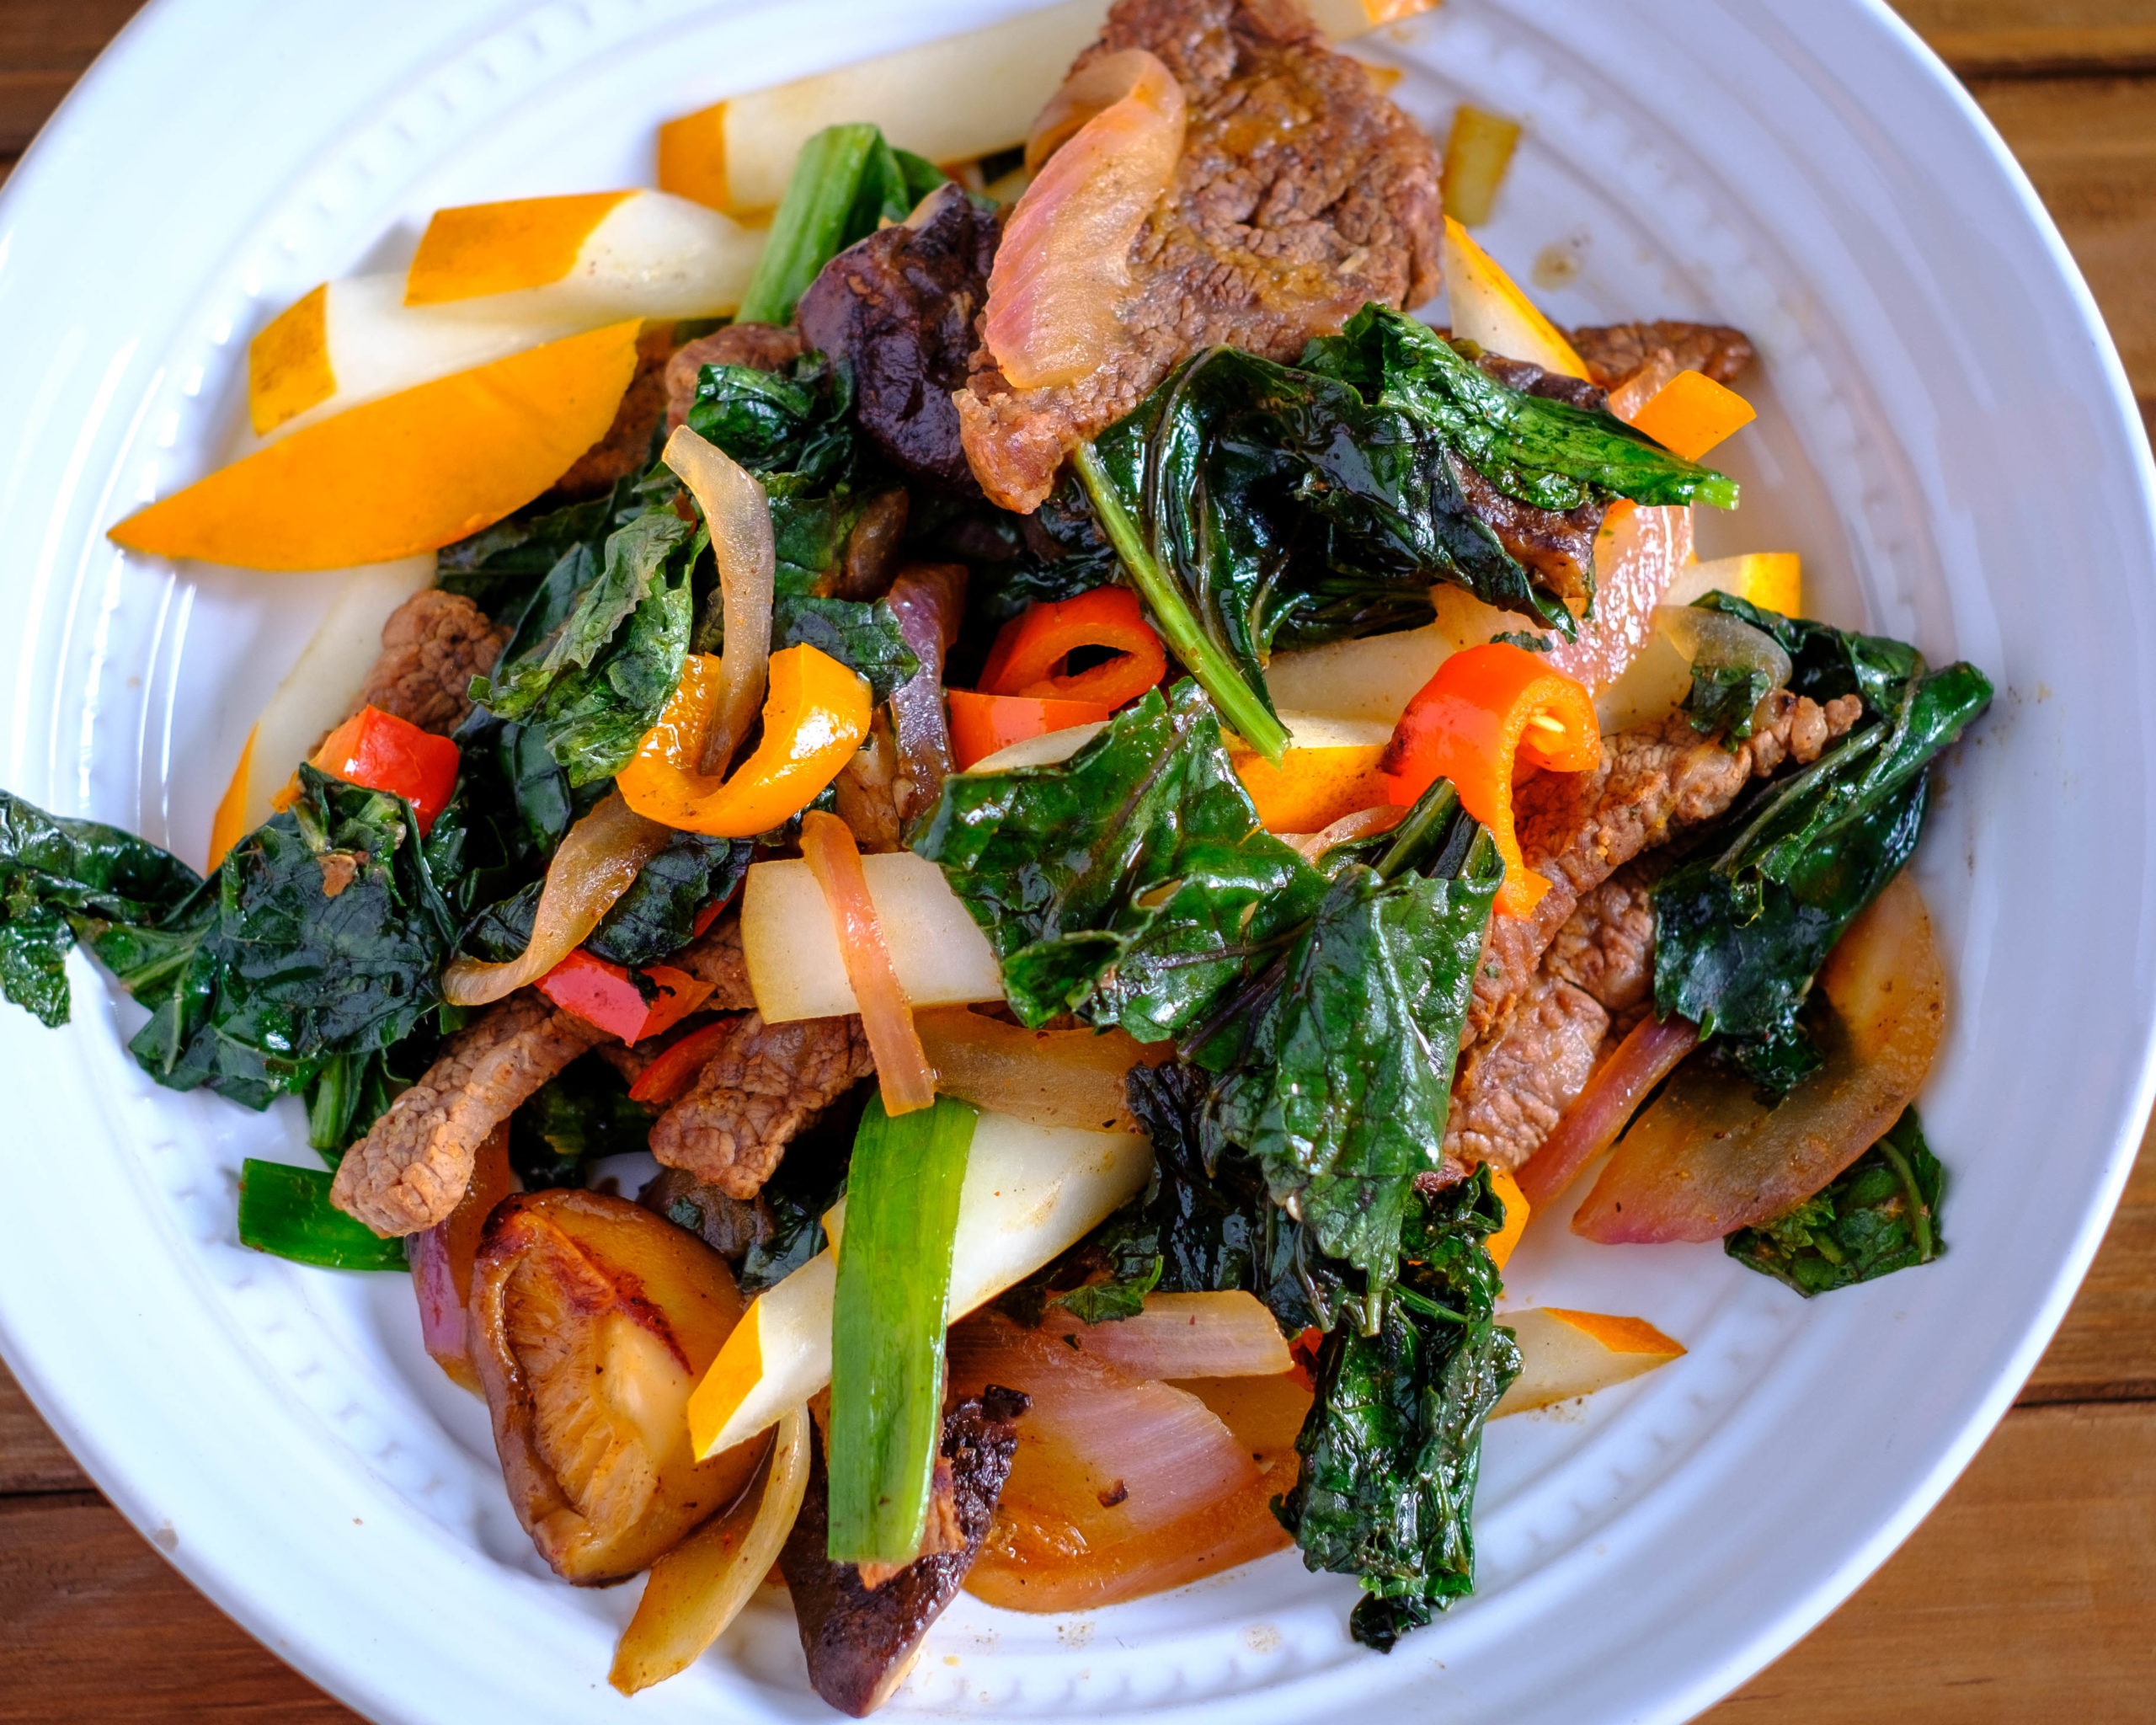 stir-fry-beef-with-pears-and-vegetables